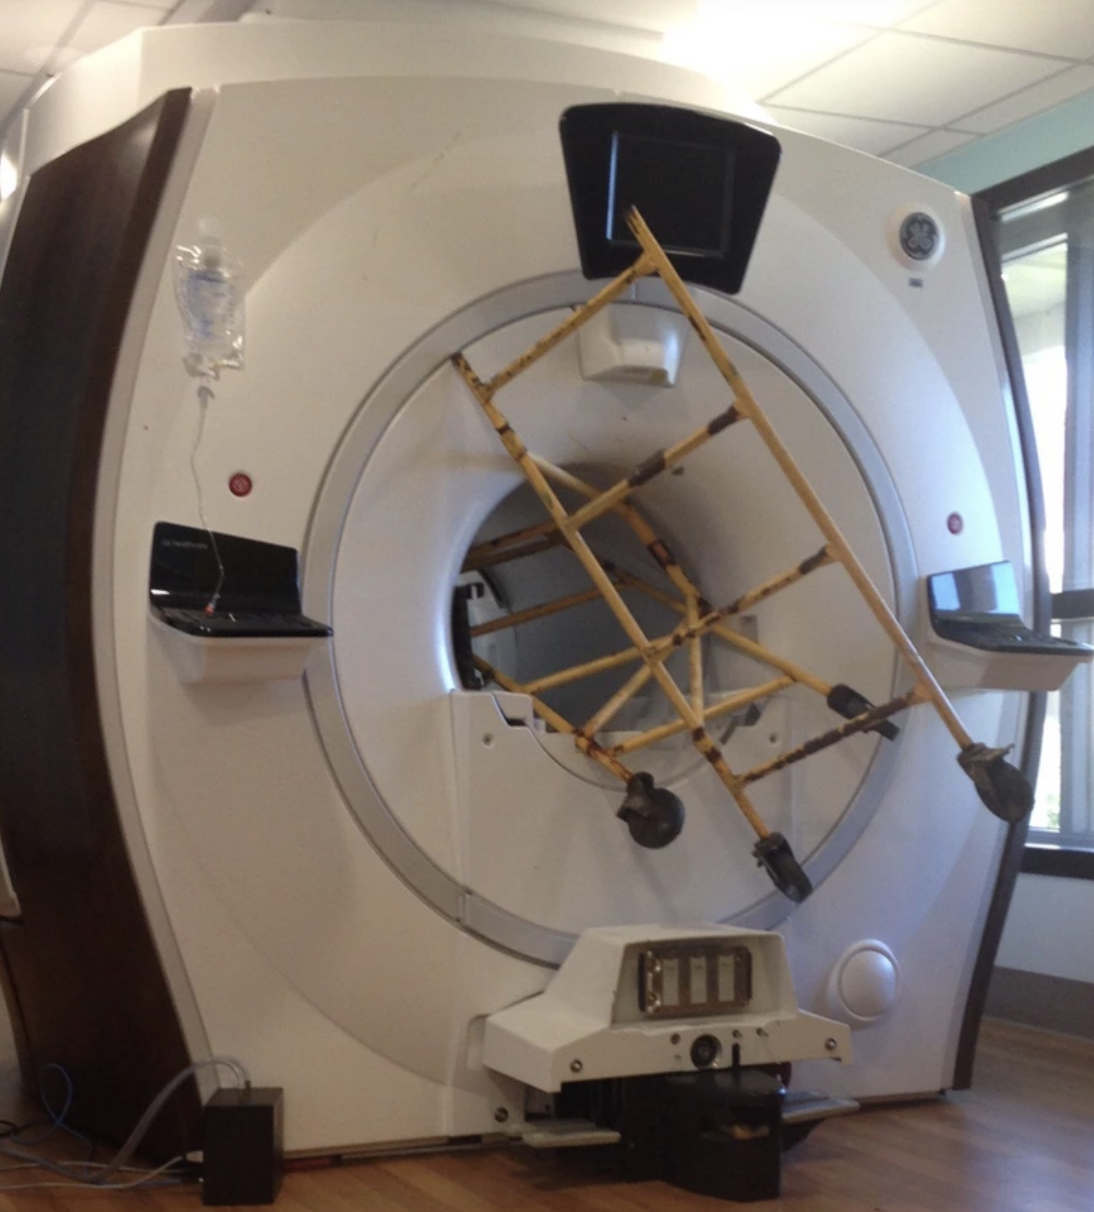 Scaffolding stuck inside an MRI machine at a hospital because of the magnetic force